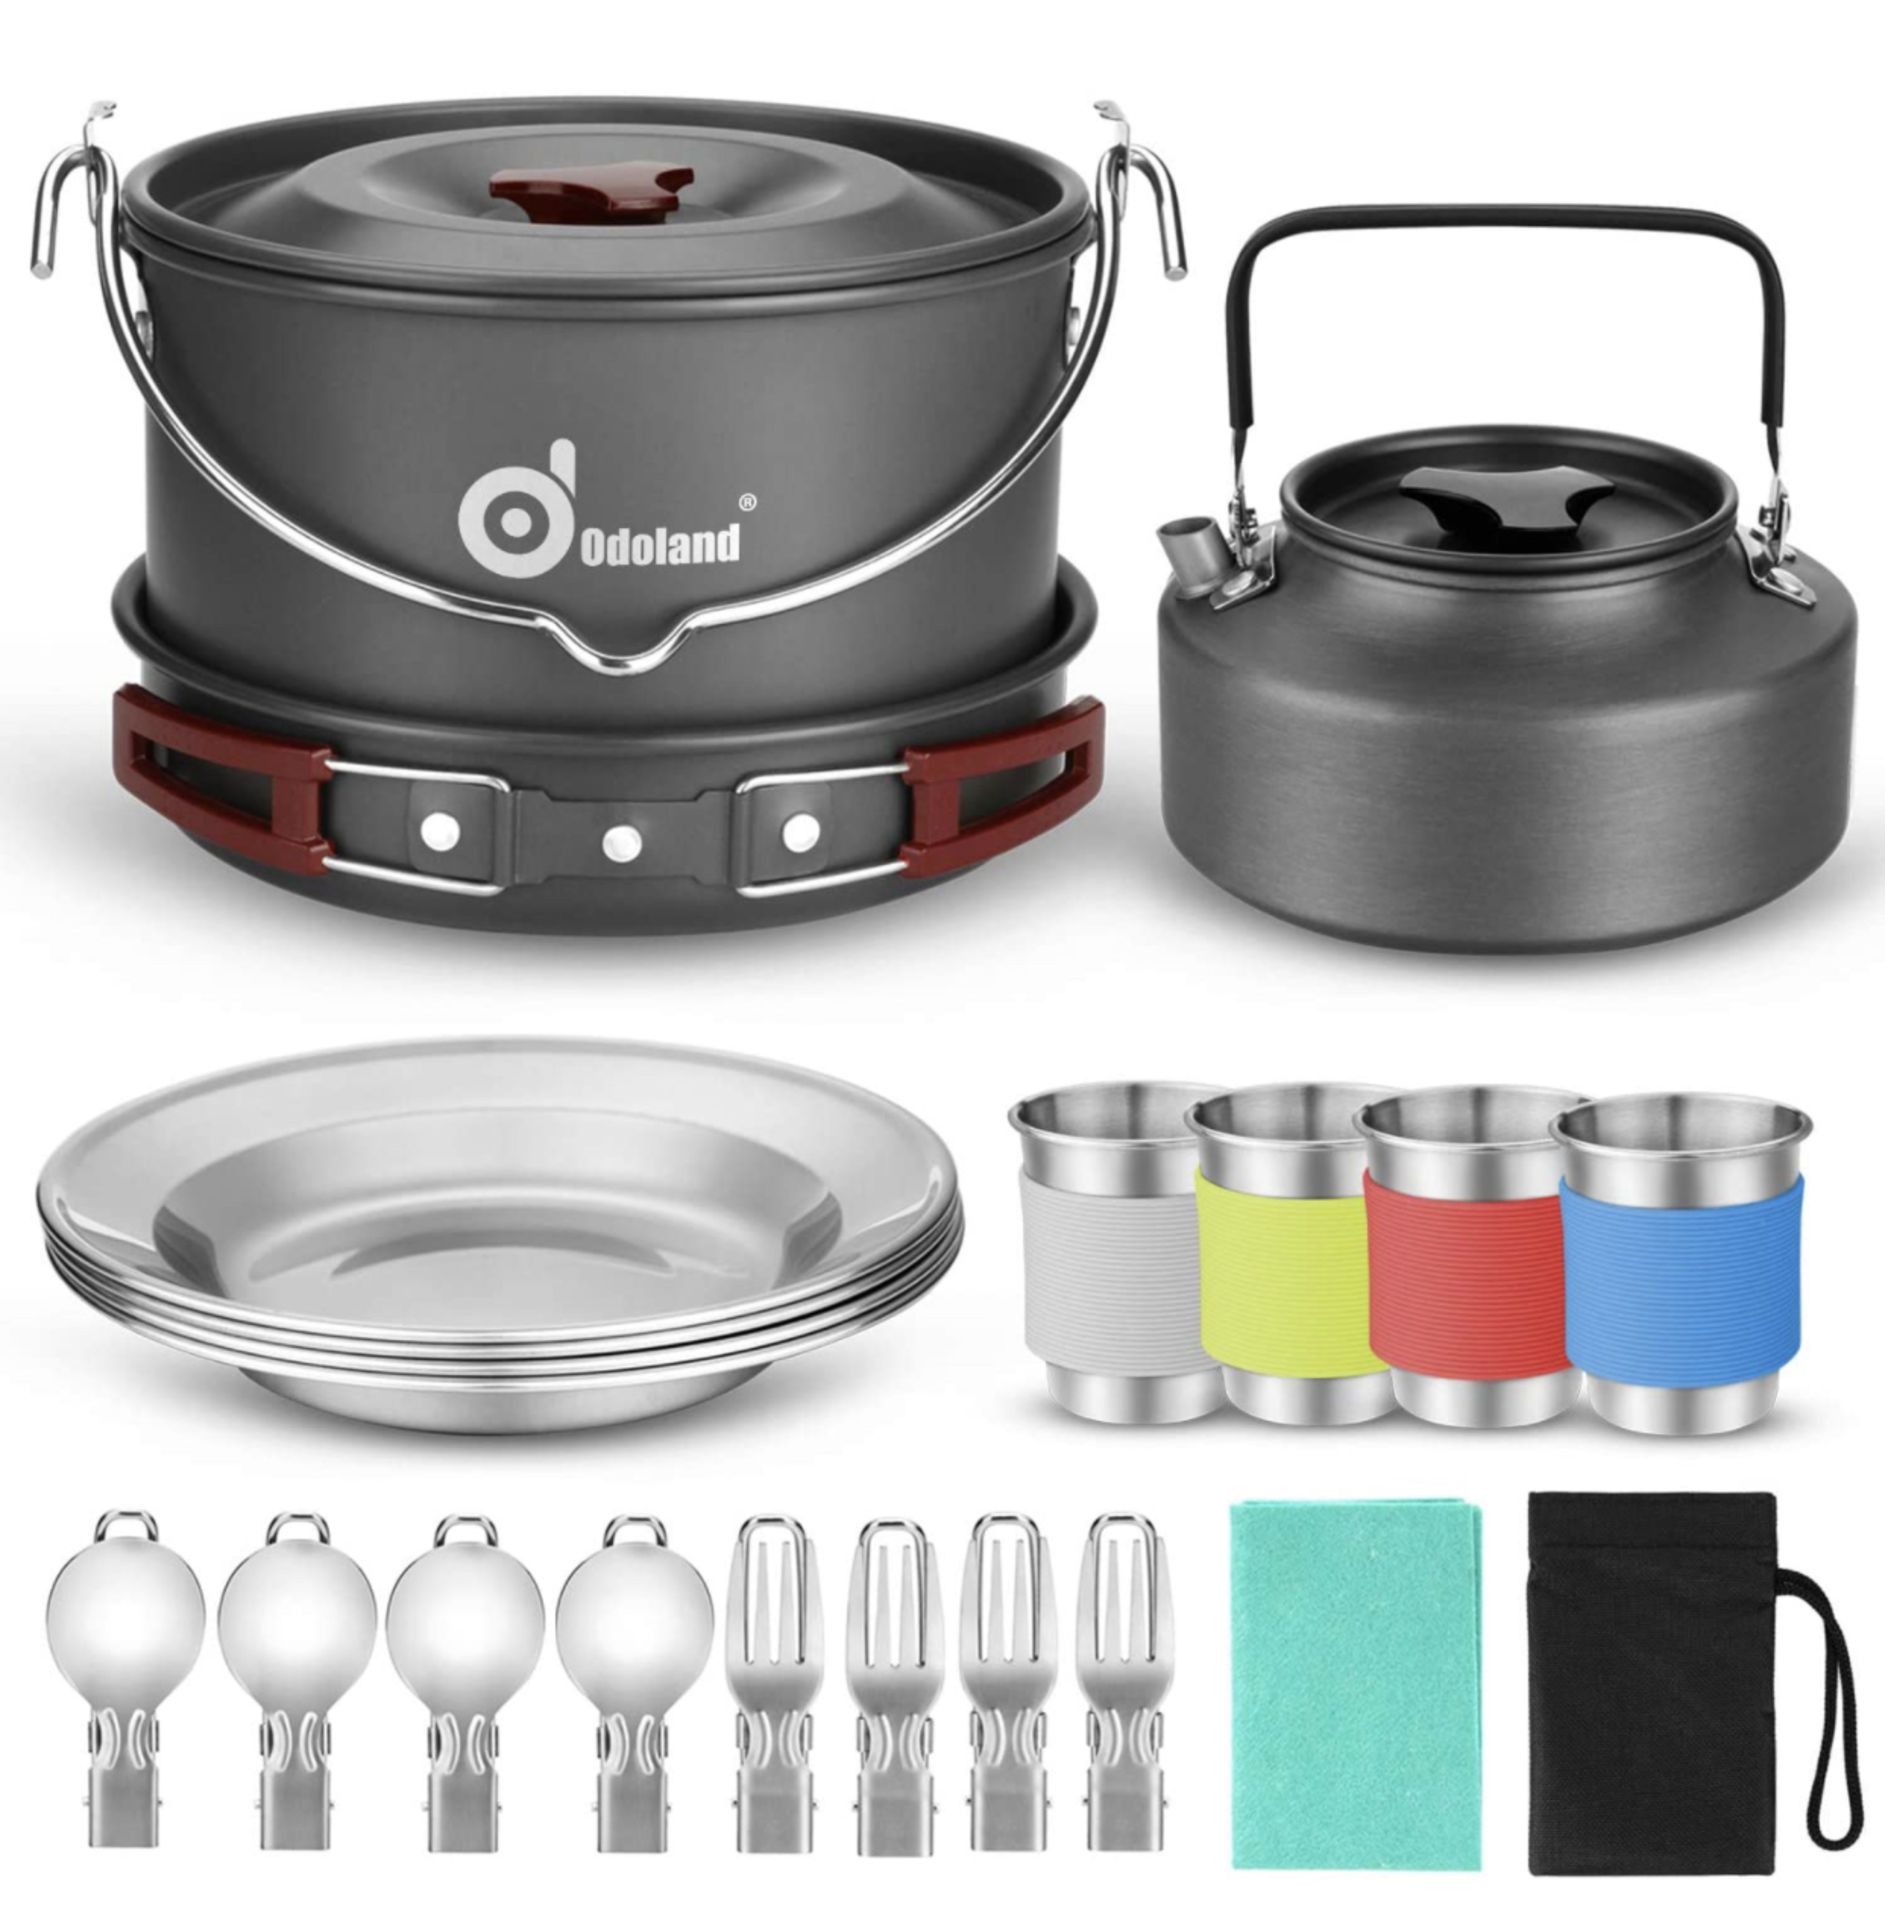 Odoland Camping Cookware Kit Portable Stainless Steel Cooking Set RRP £50